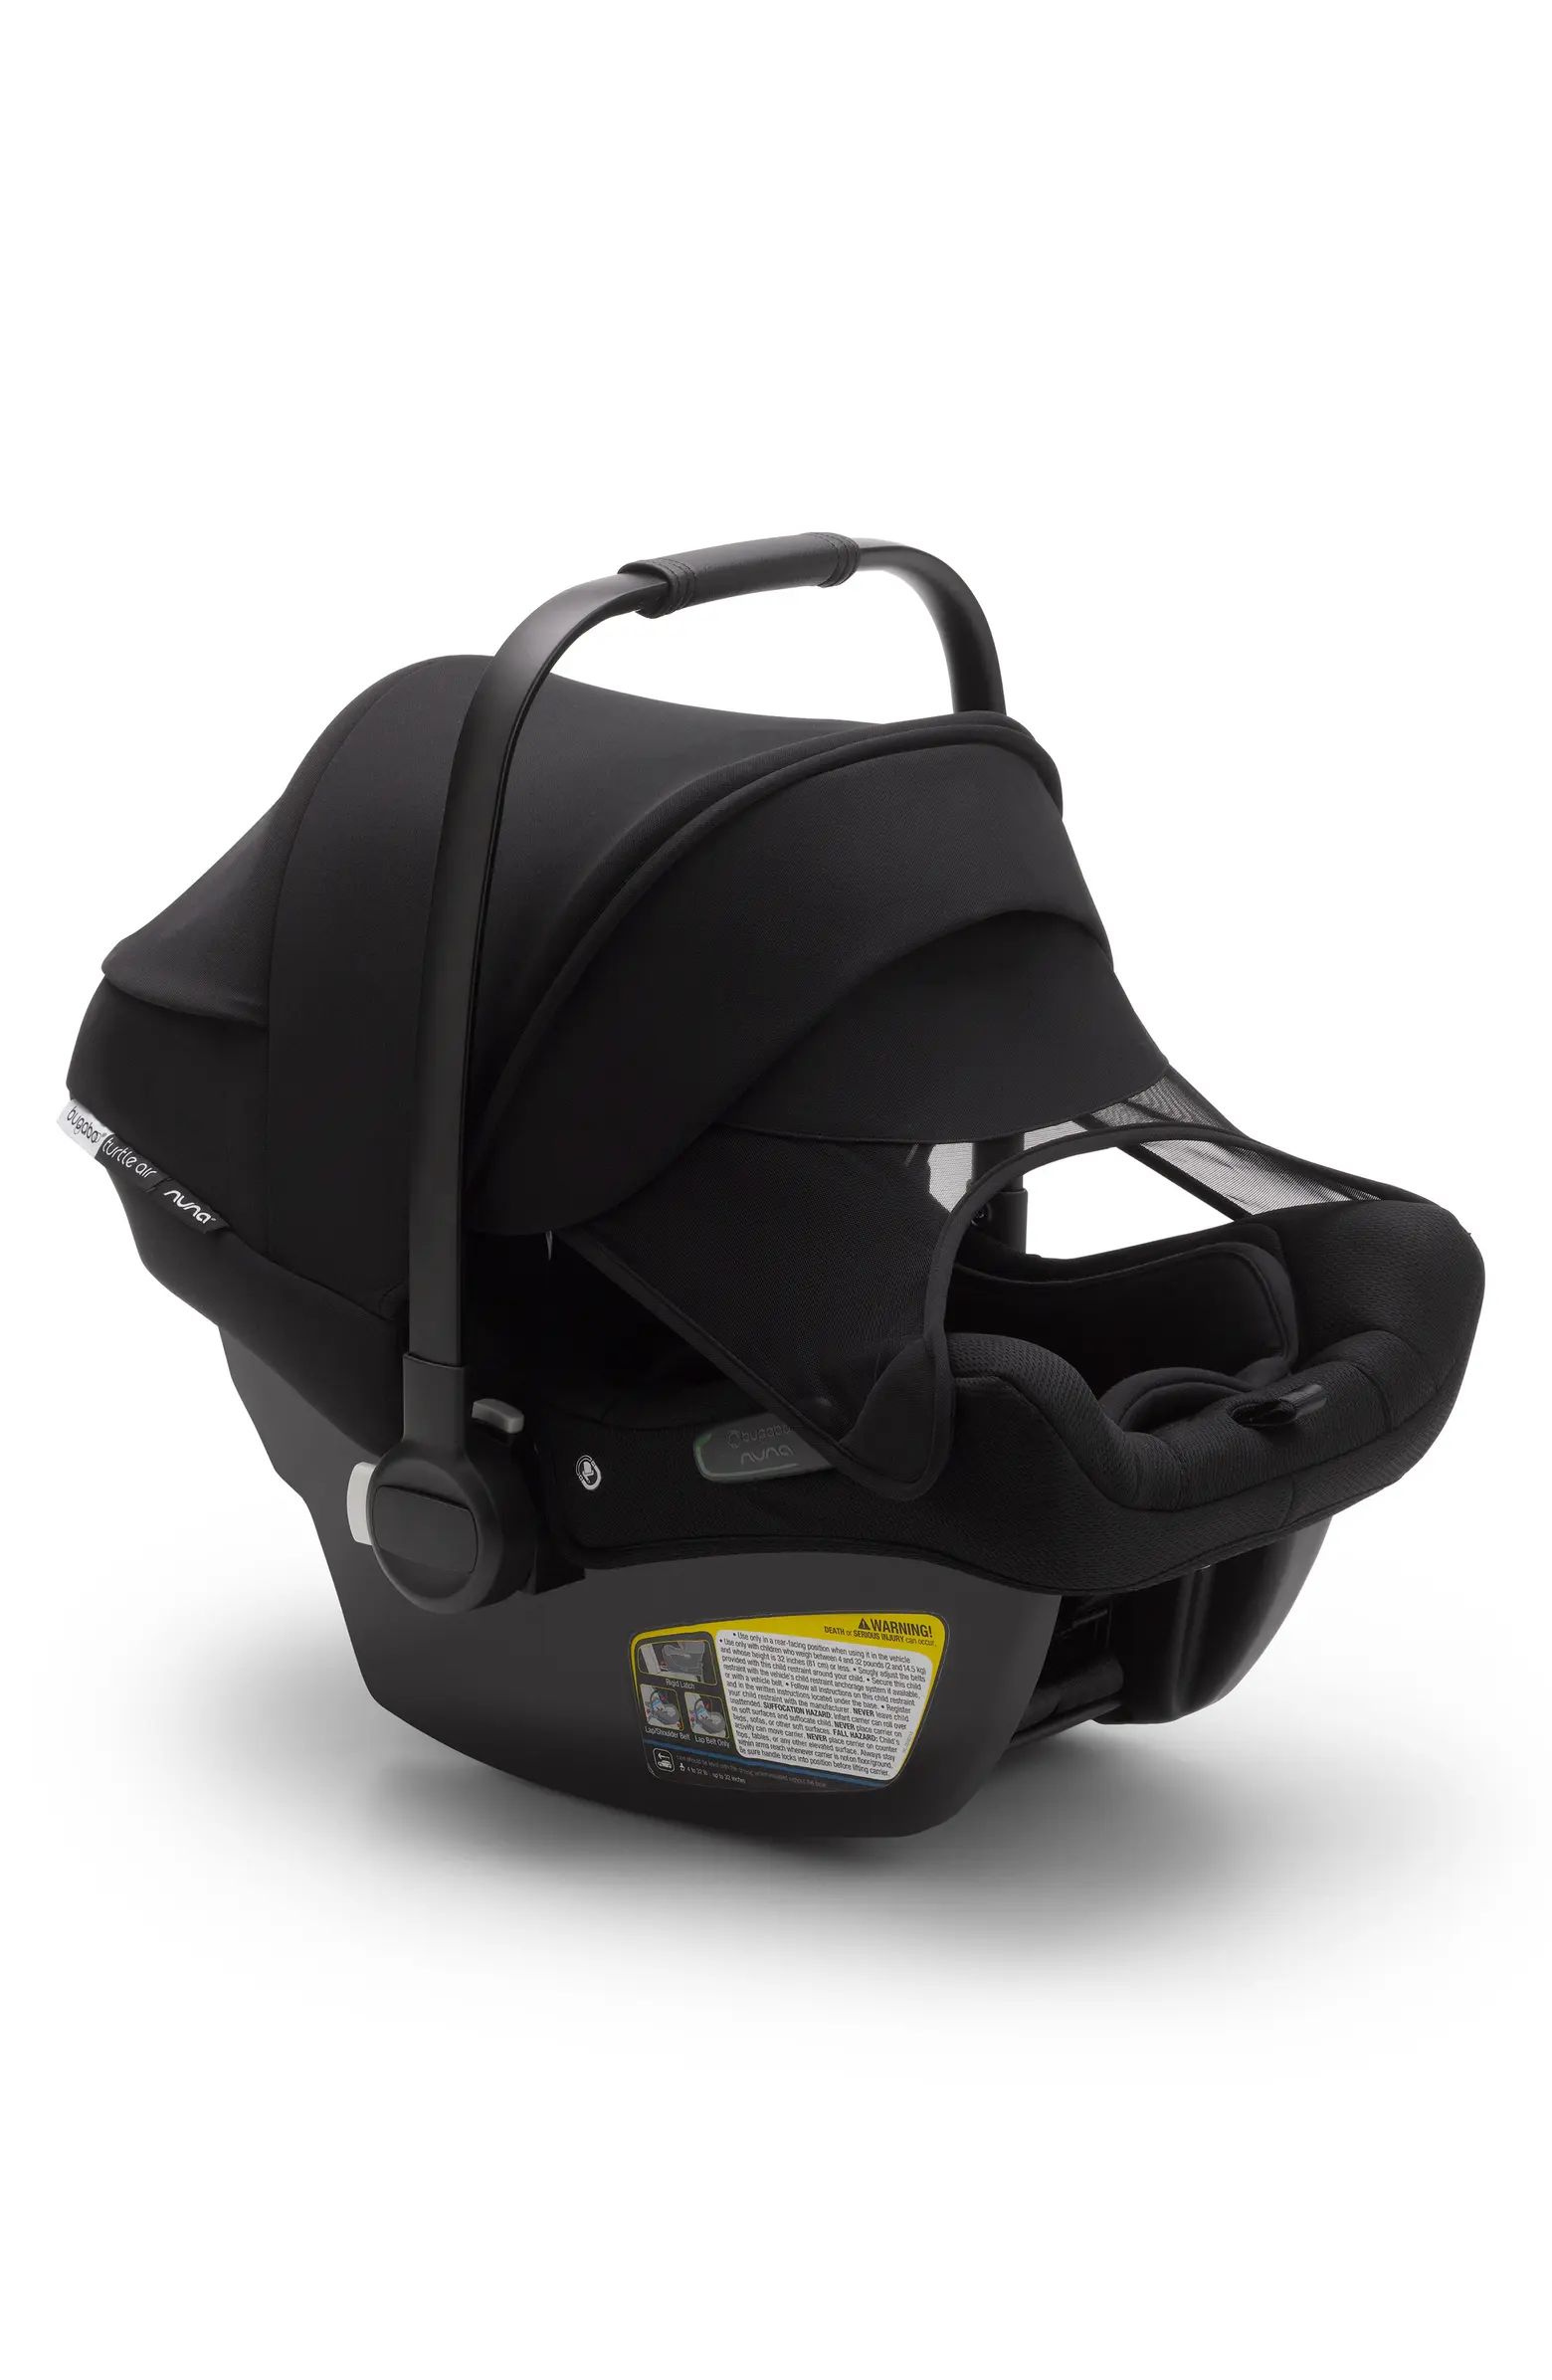 Donkey 5 Mono Stroller with Bassinet & Turtle Air by Nuna Car Seat | Nordstrom